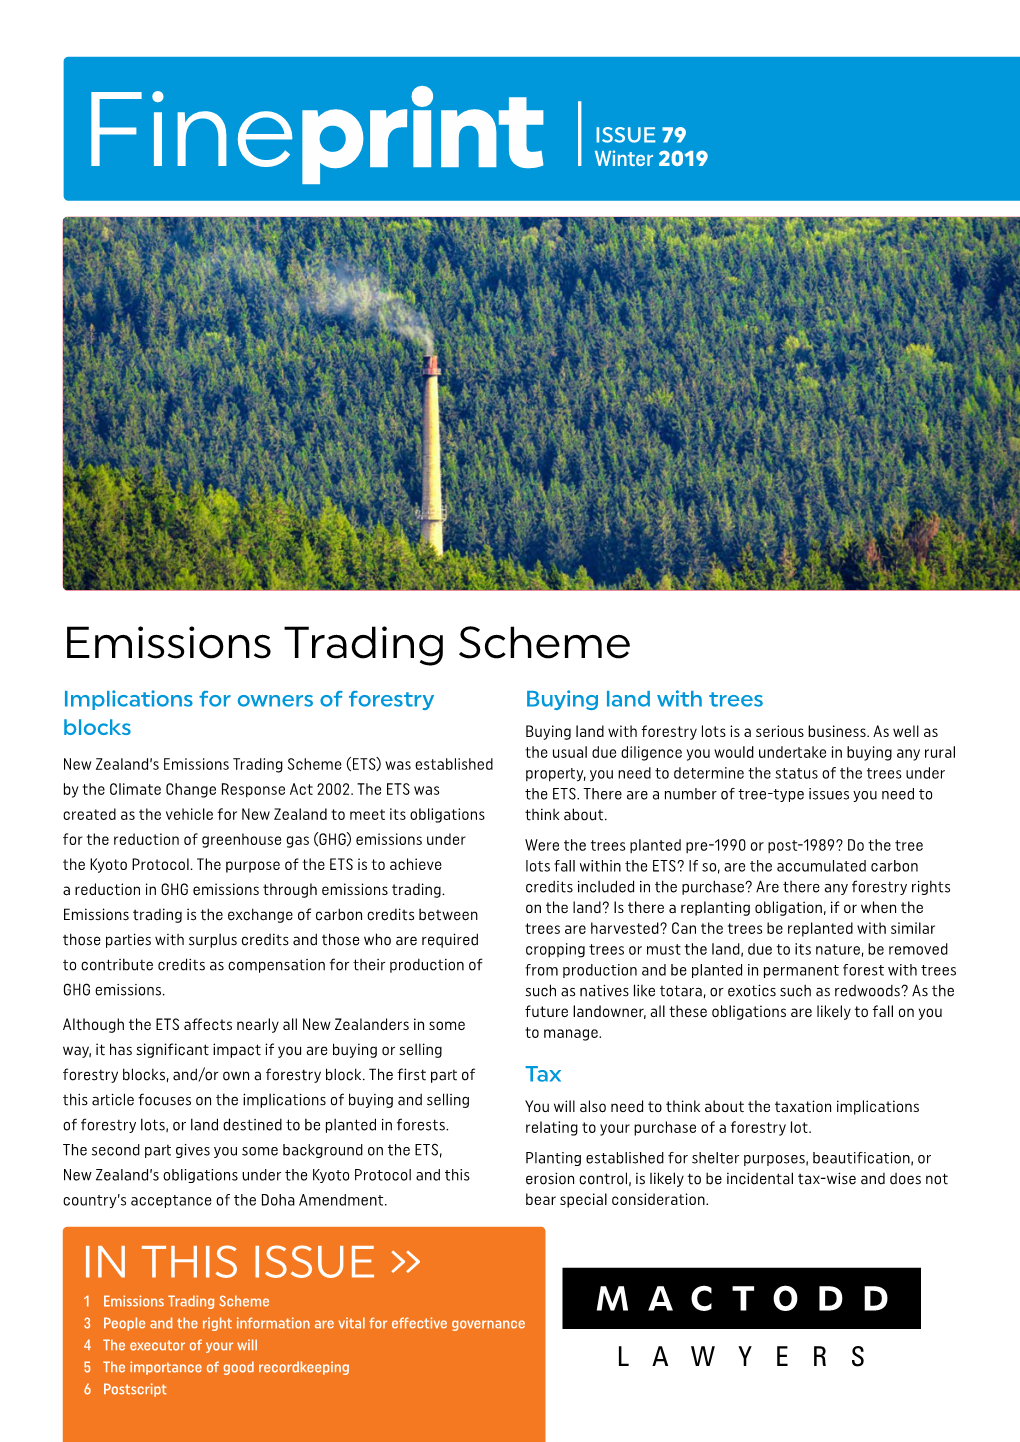 Emissions Trading Scheme in THIS ISSUE »